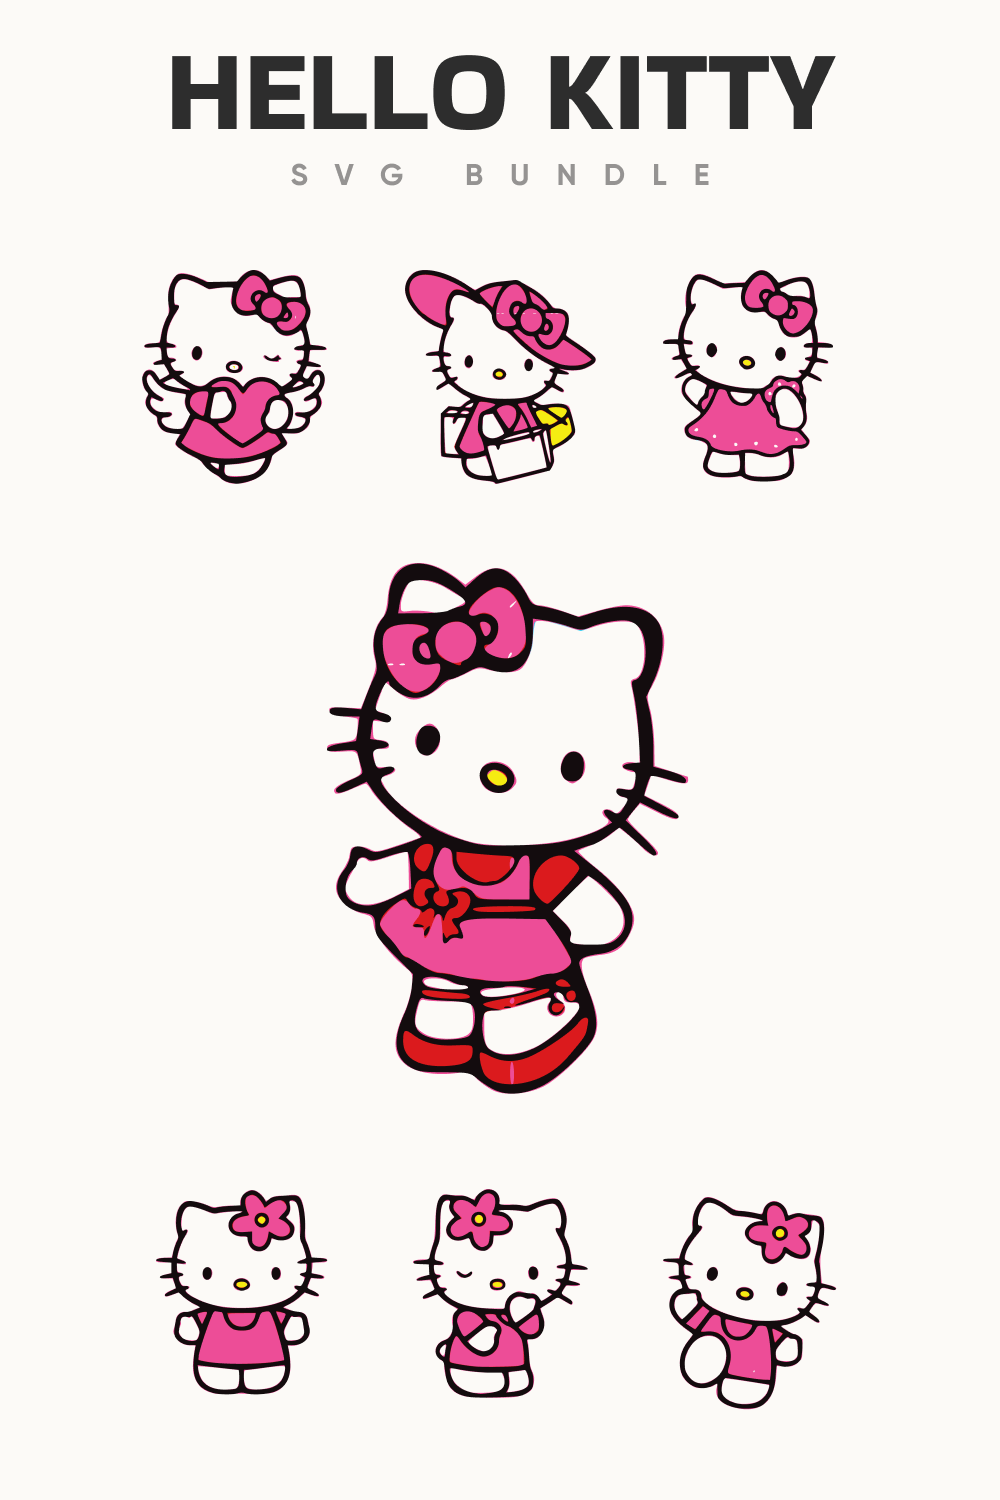 So cute hello kitty in her classic dress.